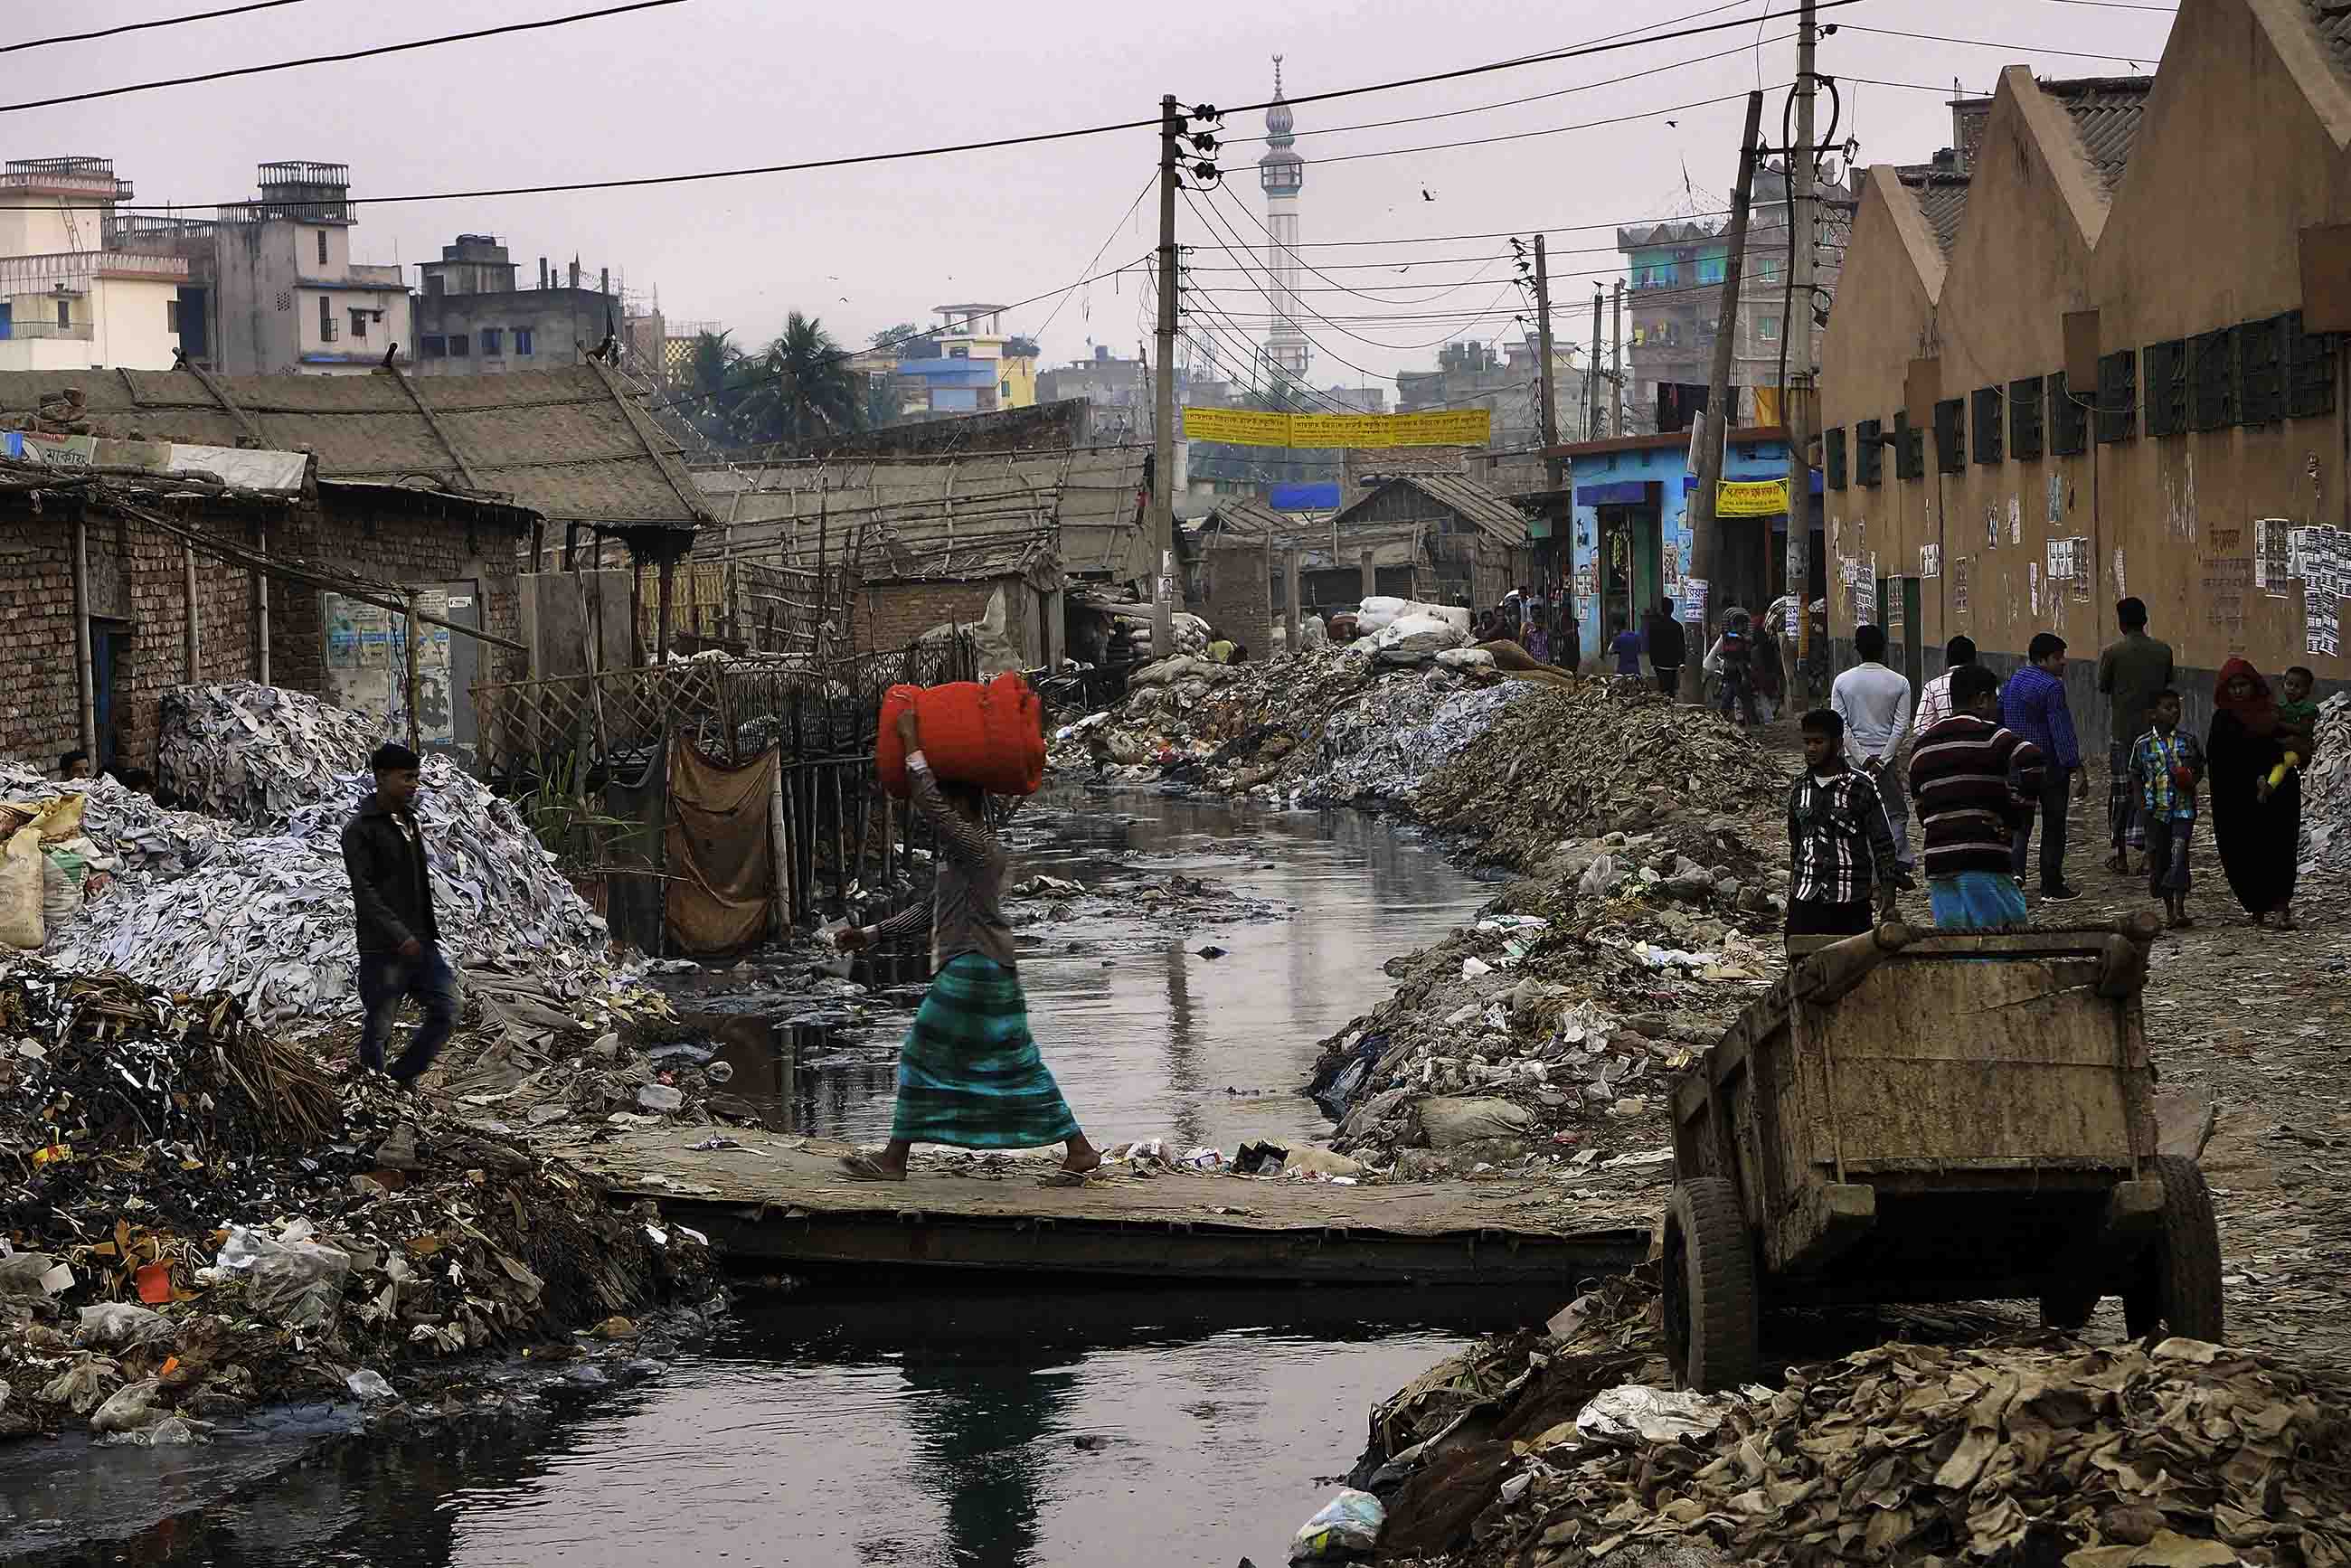 For decades, Hazaribagh has been the epicenter of Bangladesh’s leather tanning industry. More than 150 tanneries in the Dhaka neighborhood pump untreated wastewater into open canals lined with rotting hides and leather scraps. Image by Larry C. Price. Bangladesh, 2016.